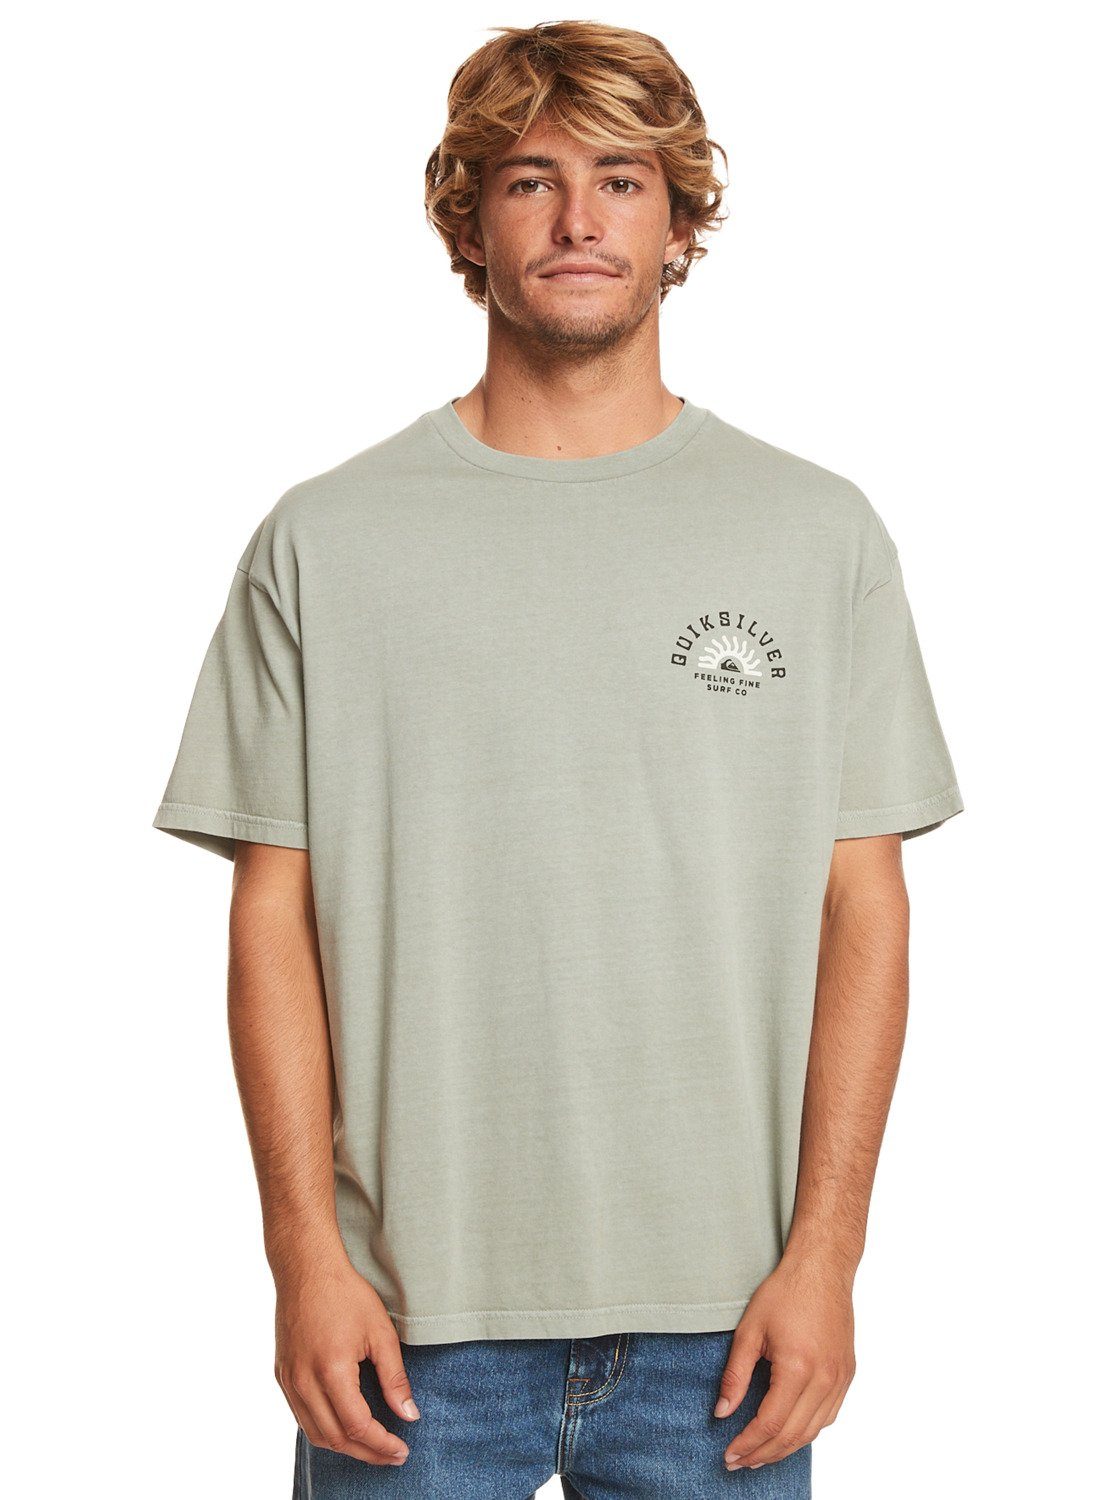 Quiksilver T-Shirt Qs State Of Mind Iceberg Green